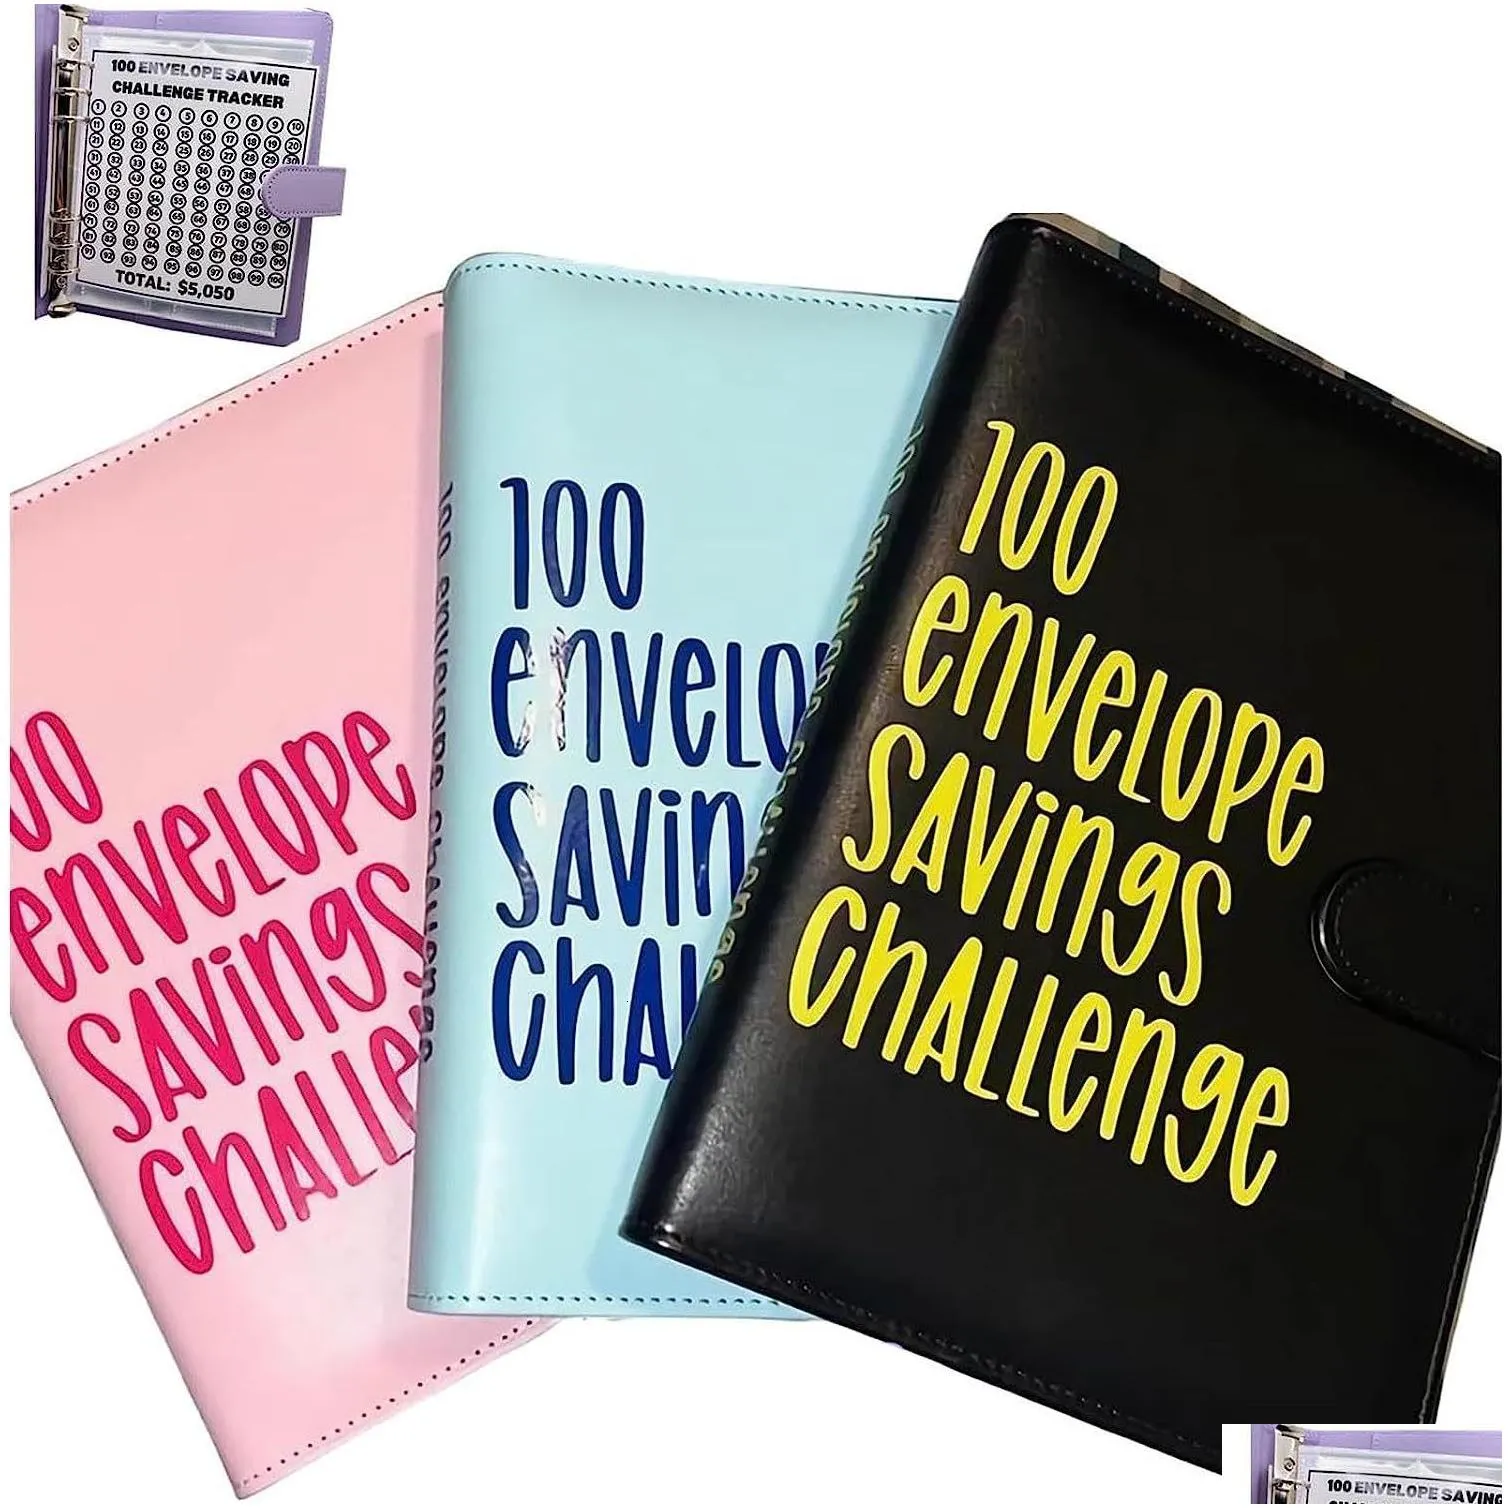 Storage Holders Racks 100 Envelope Challenge Binder Easy and Fun Way to Save Savings Challenges Budget with Cash Envelopes 230810